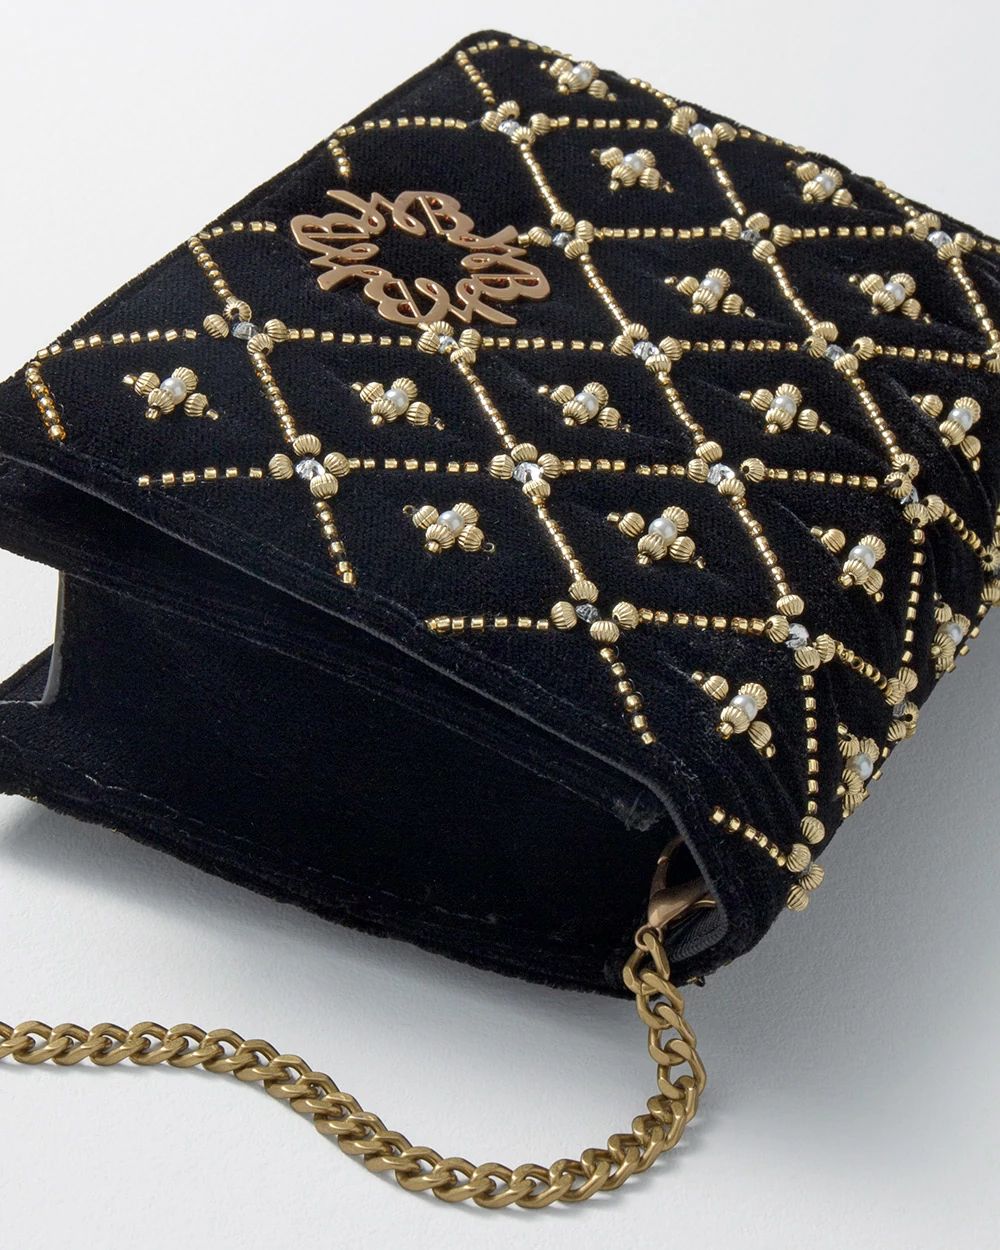 Bejeweled Velvet Crossbody Bag click to view larger image.